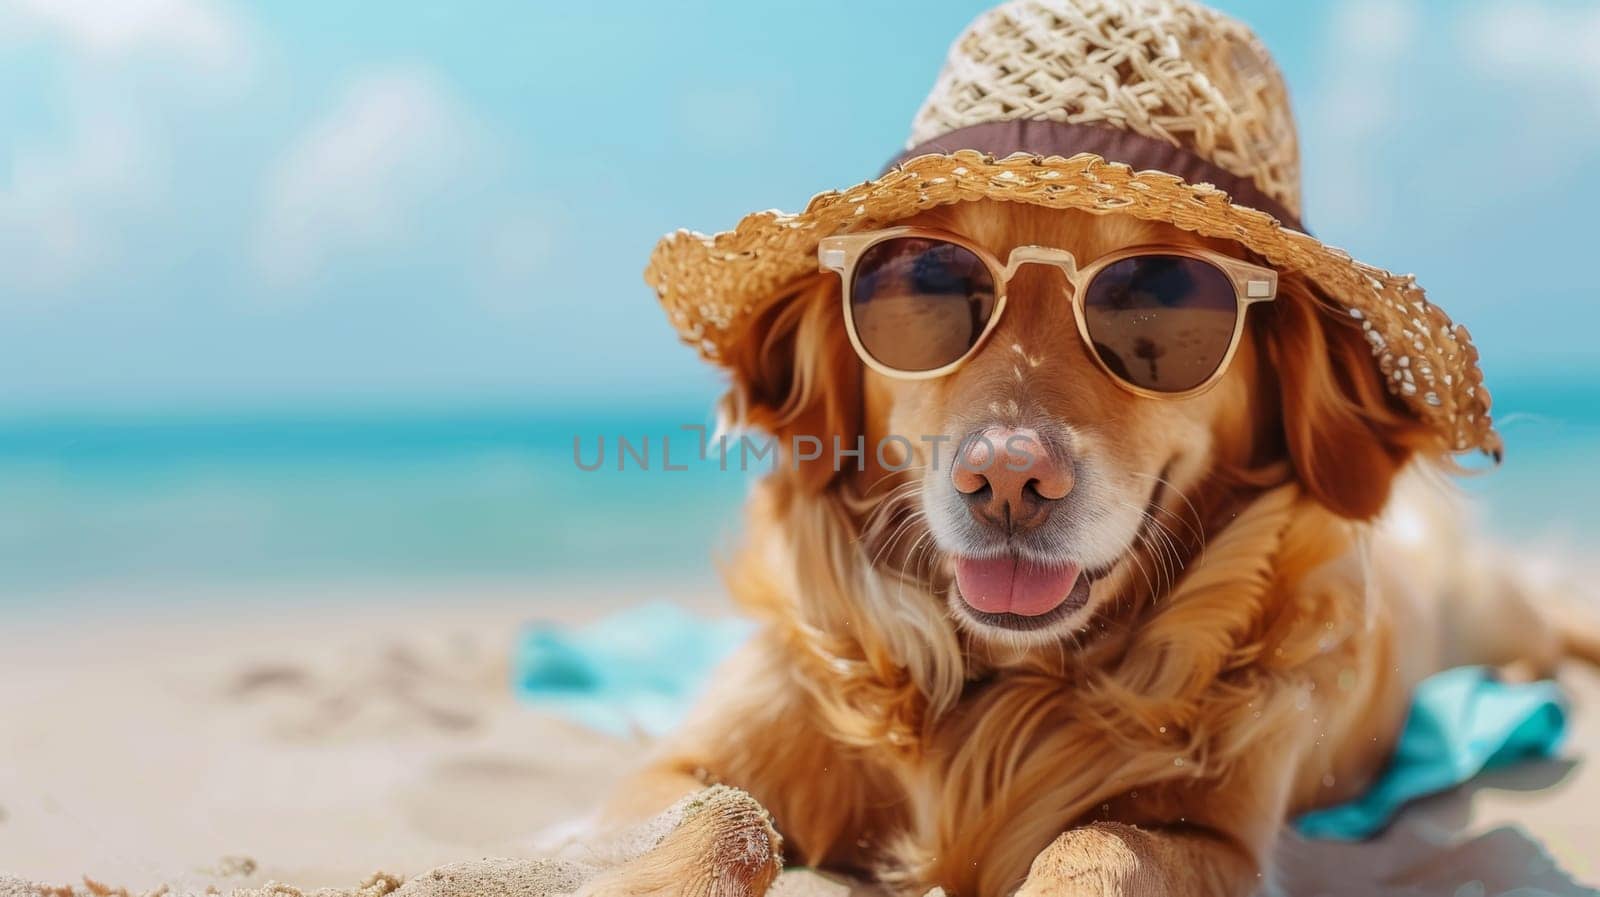 A dog wearing sunglasses and a hat on the beach